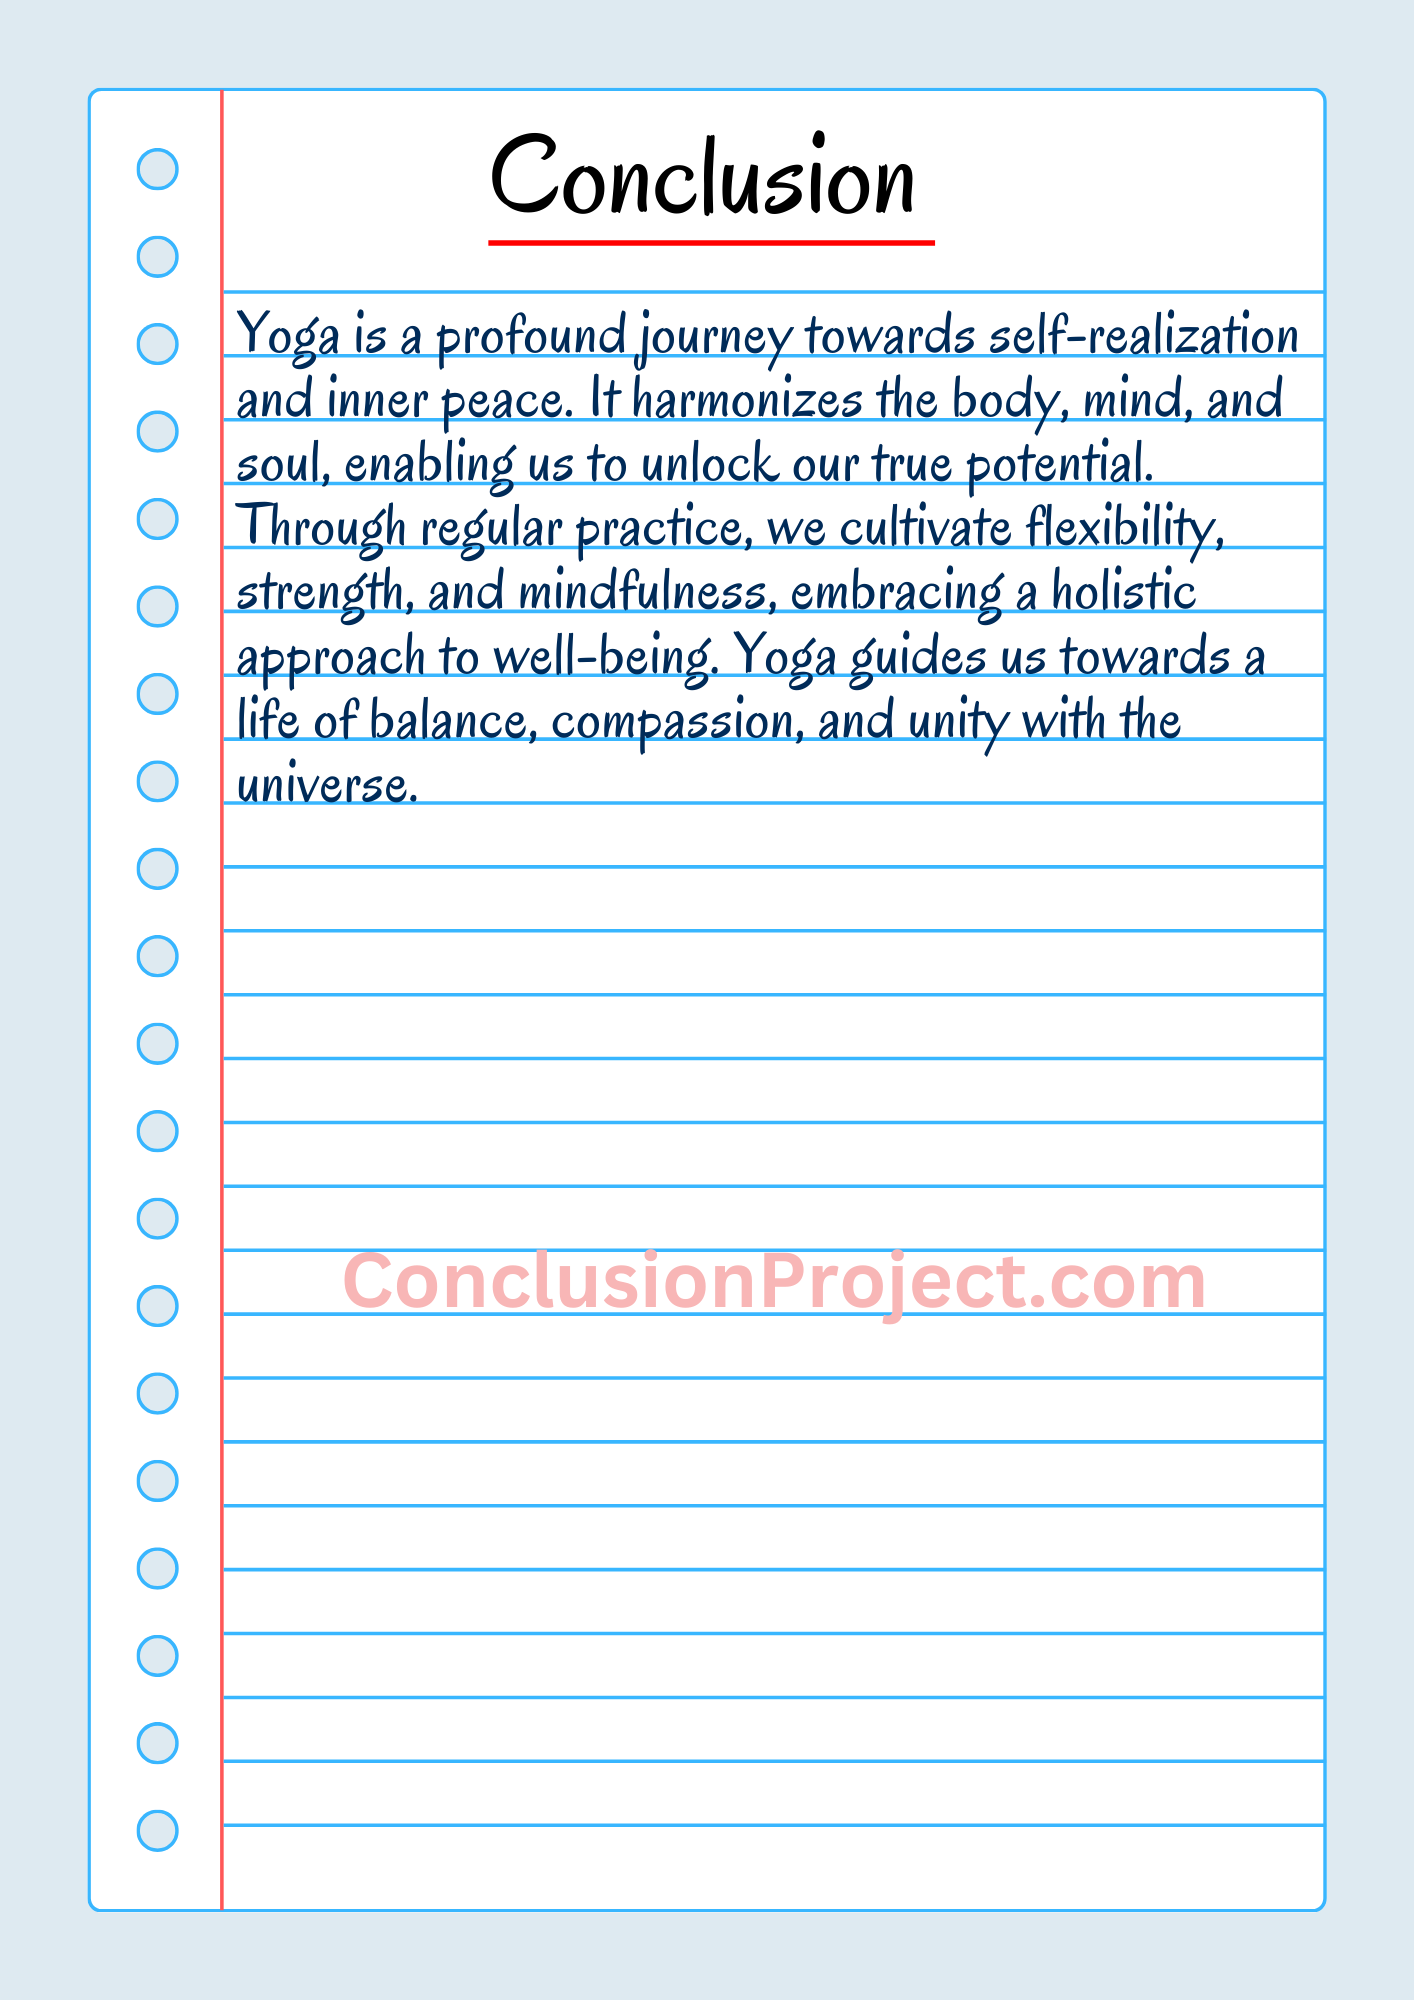 Conclusion of Yoga